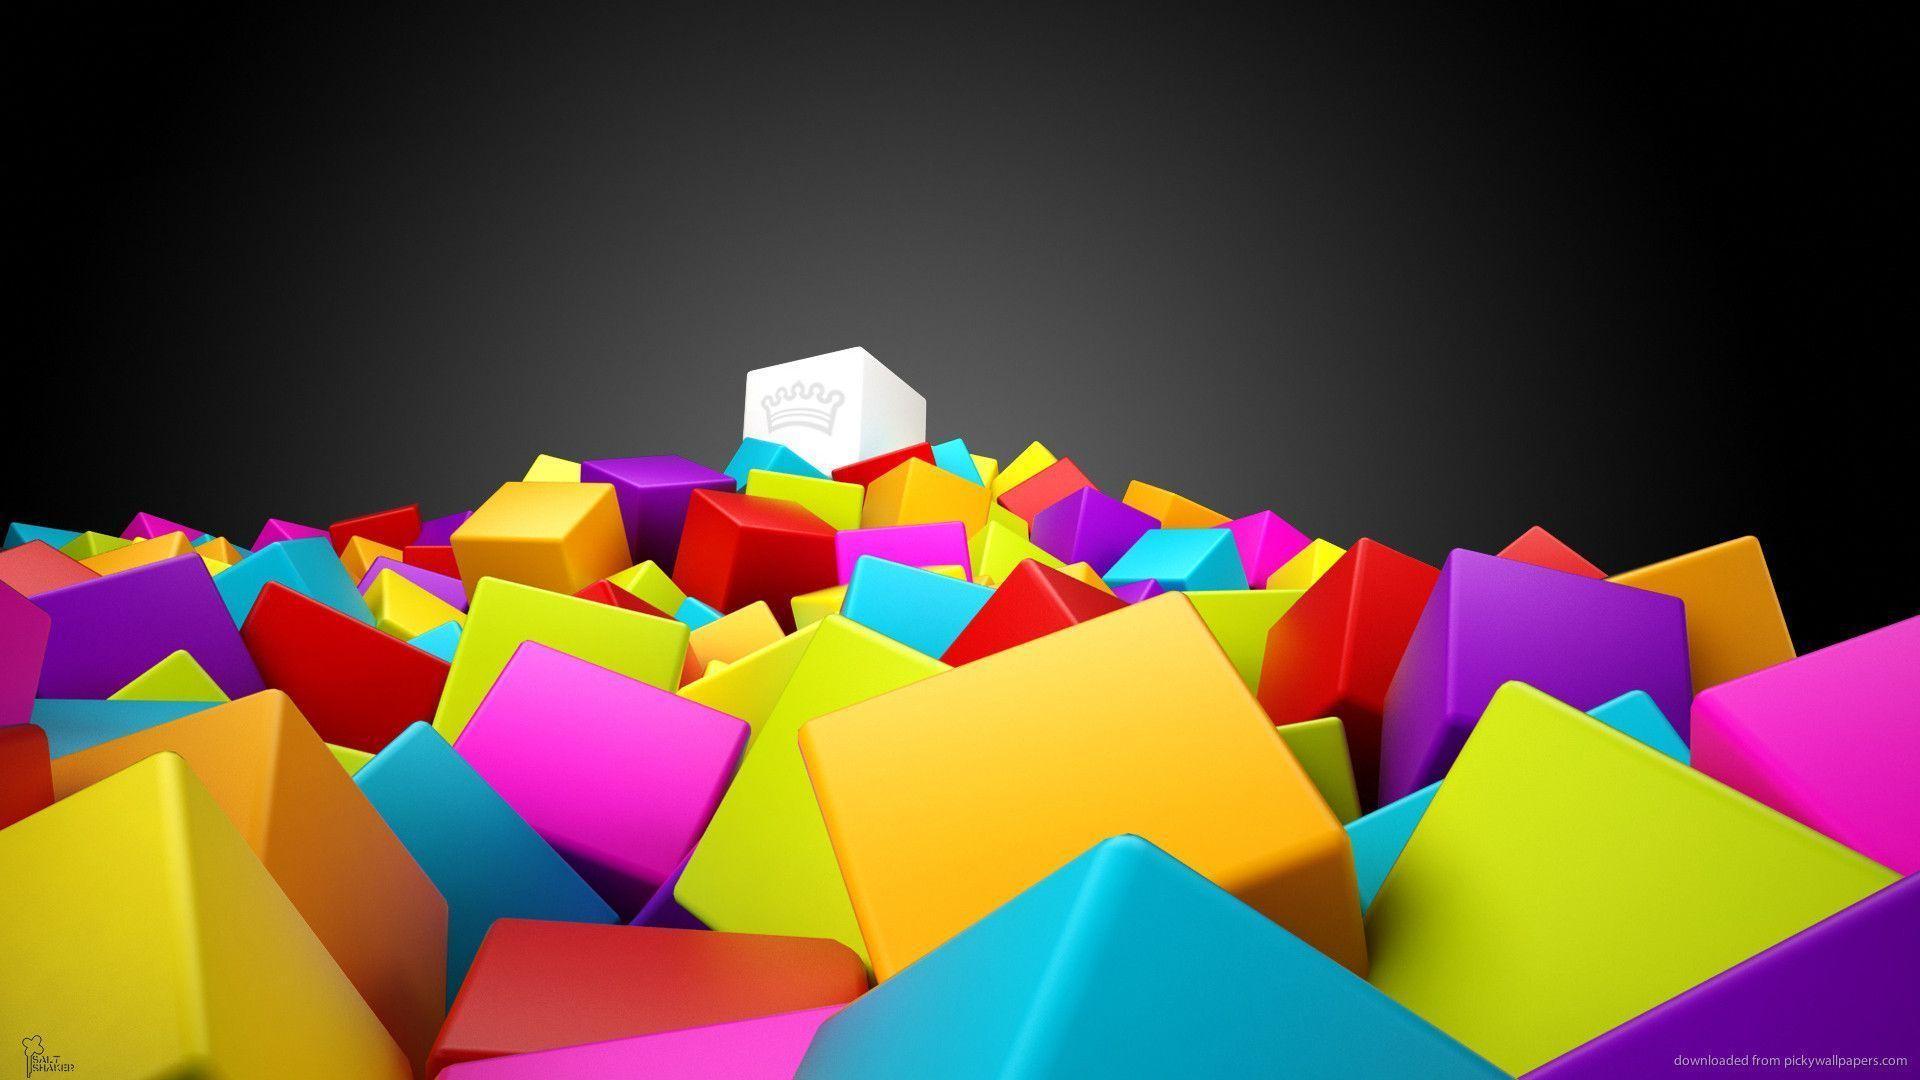 Download 1920x1080 Cool 3D Colorful Cubes Wallpapers